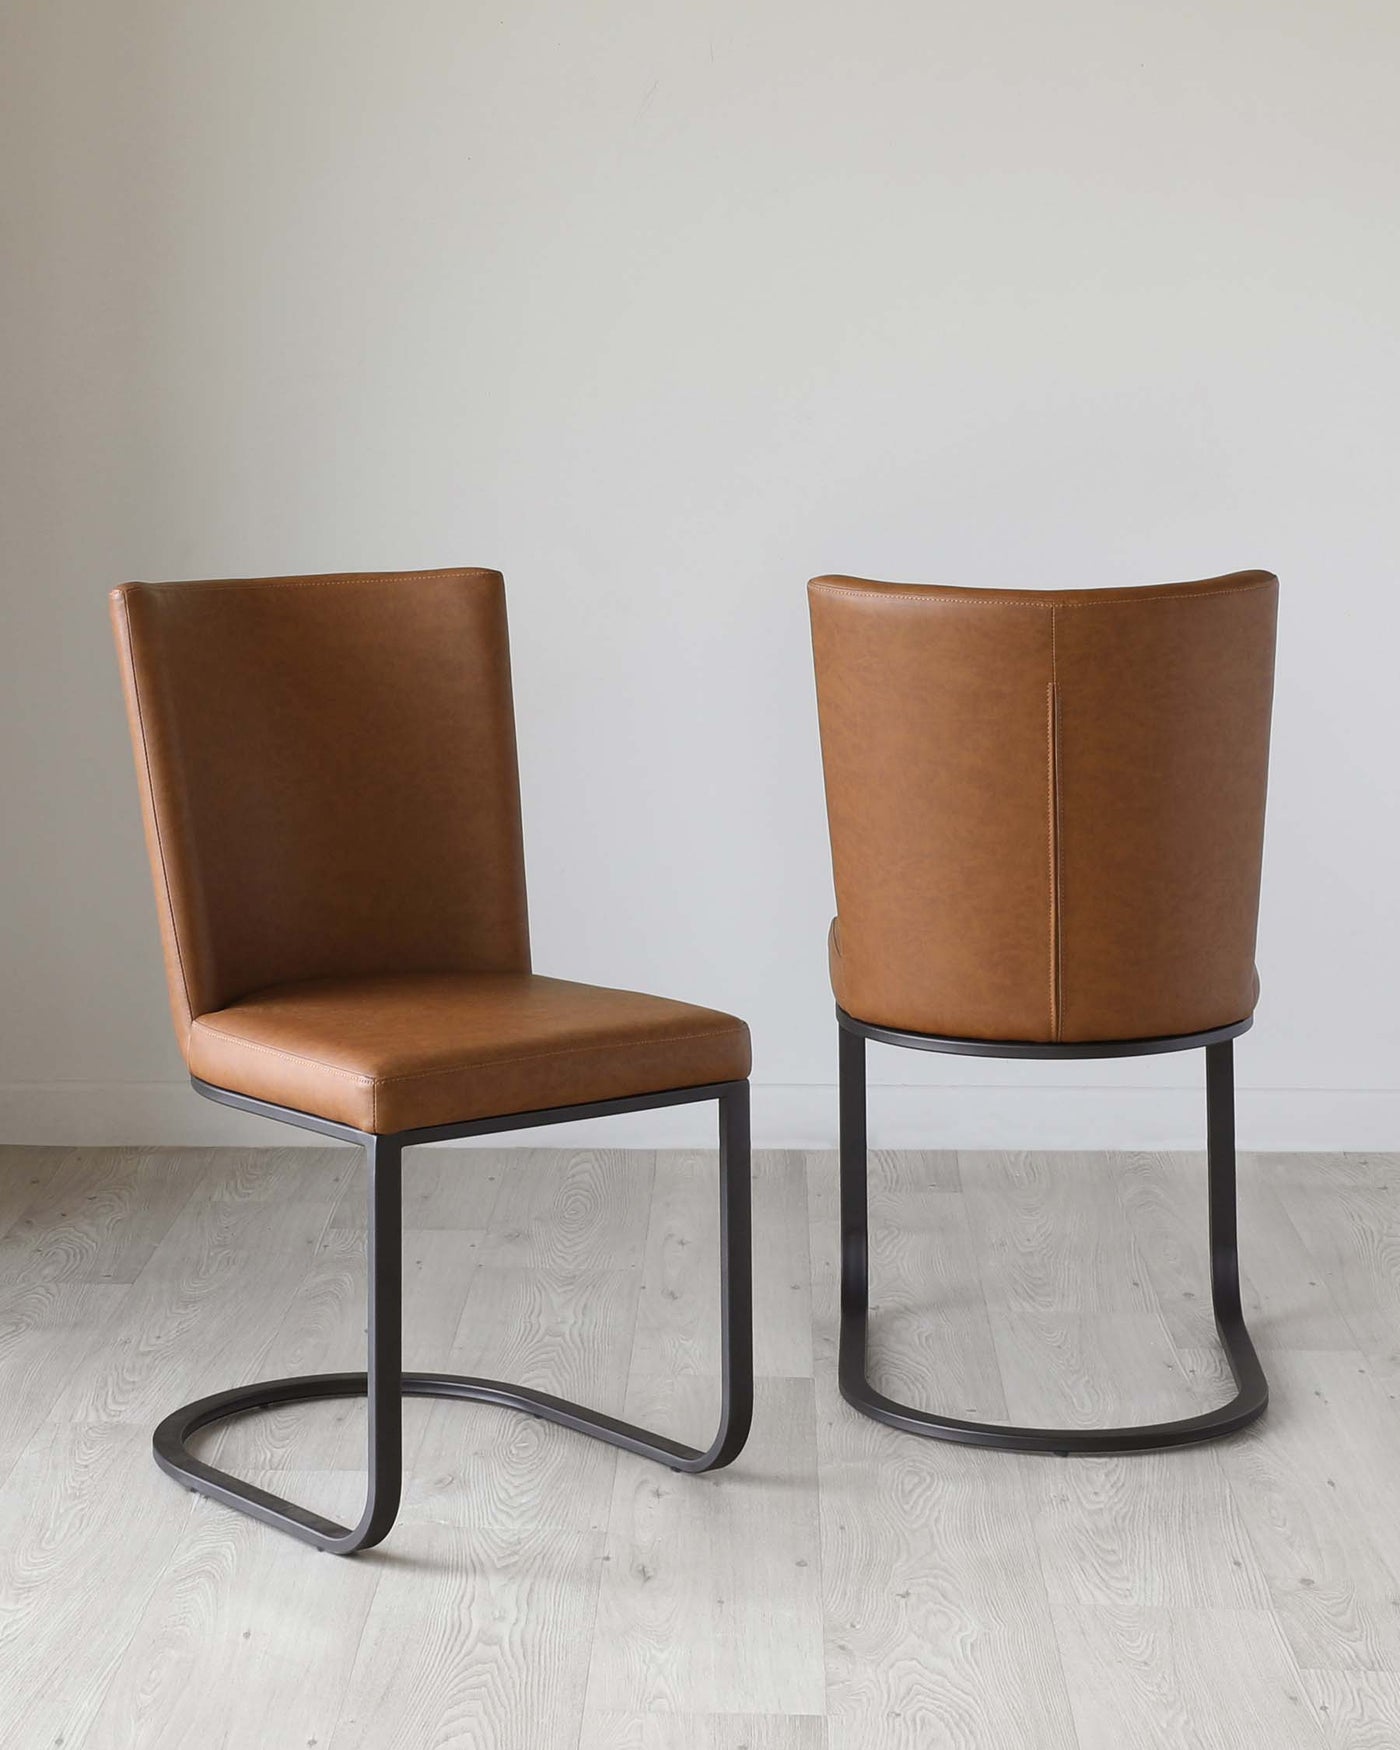 Two modern dining chairs with a sleek design, featuring caramel-coloured leather upholstery and matte black metal sled bases. The chairs have a simple yet elegant silhouette with a curved backrest for added comfort. They are placed on a light hardwood floor against a neutral wall background, highlighting their contemporary style.